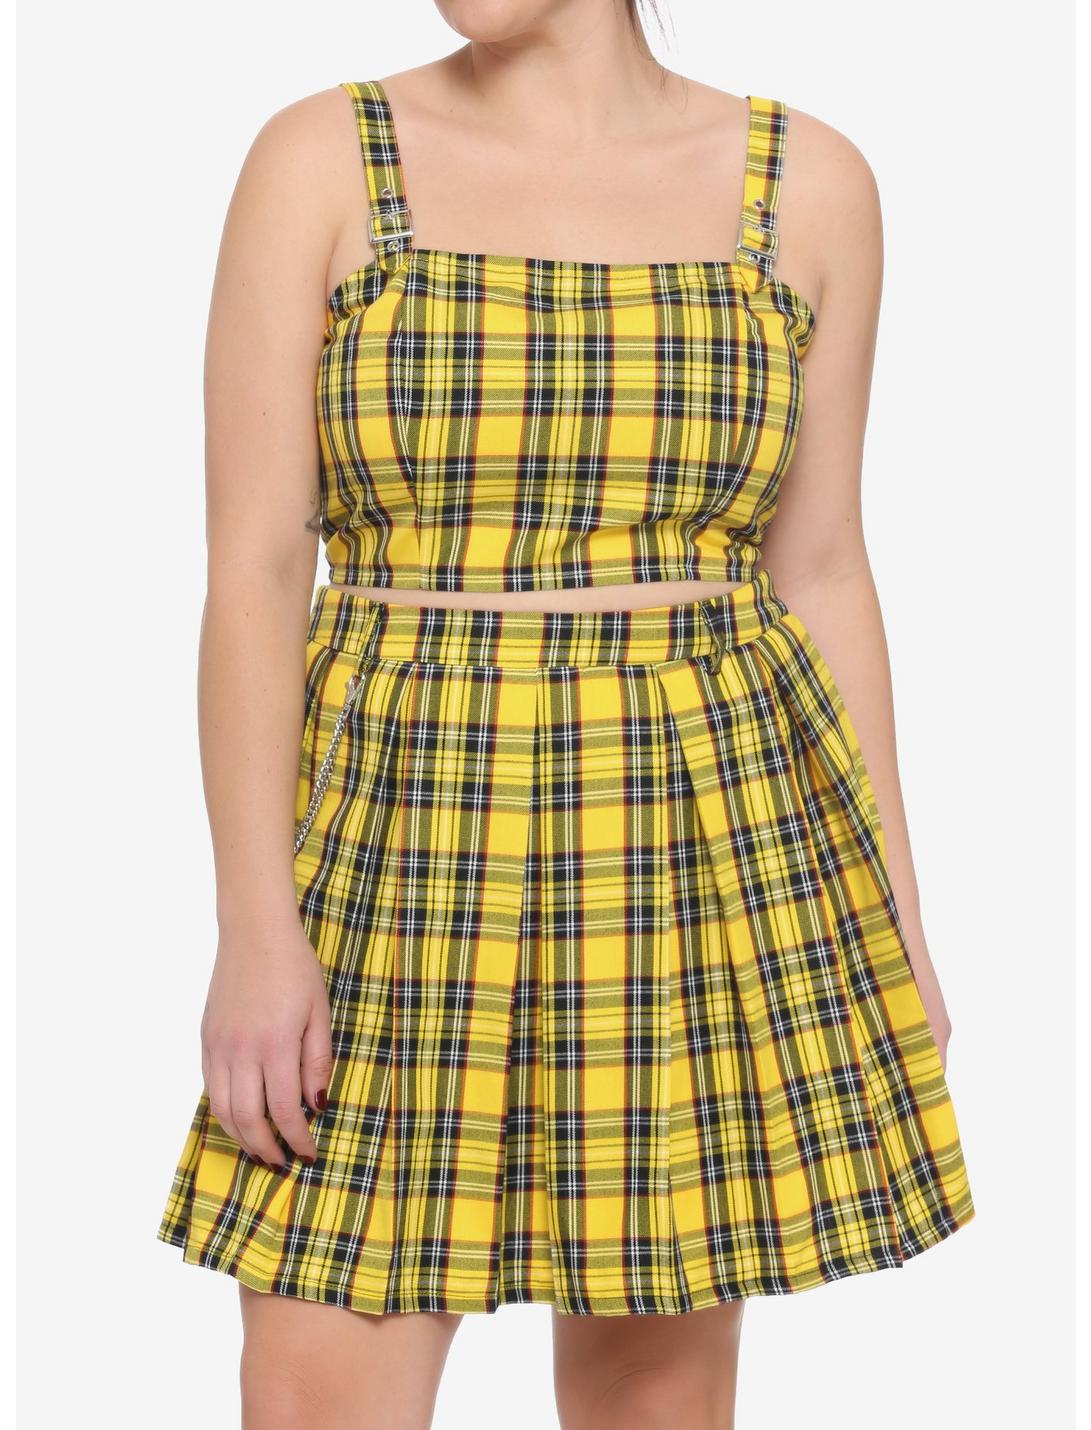 Yellow Plaid Girls Crop Woven Top Plus Size, PLAID - YELLOW, hi-res